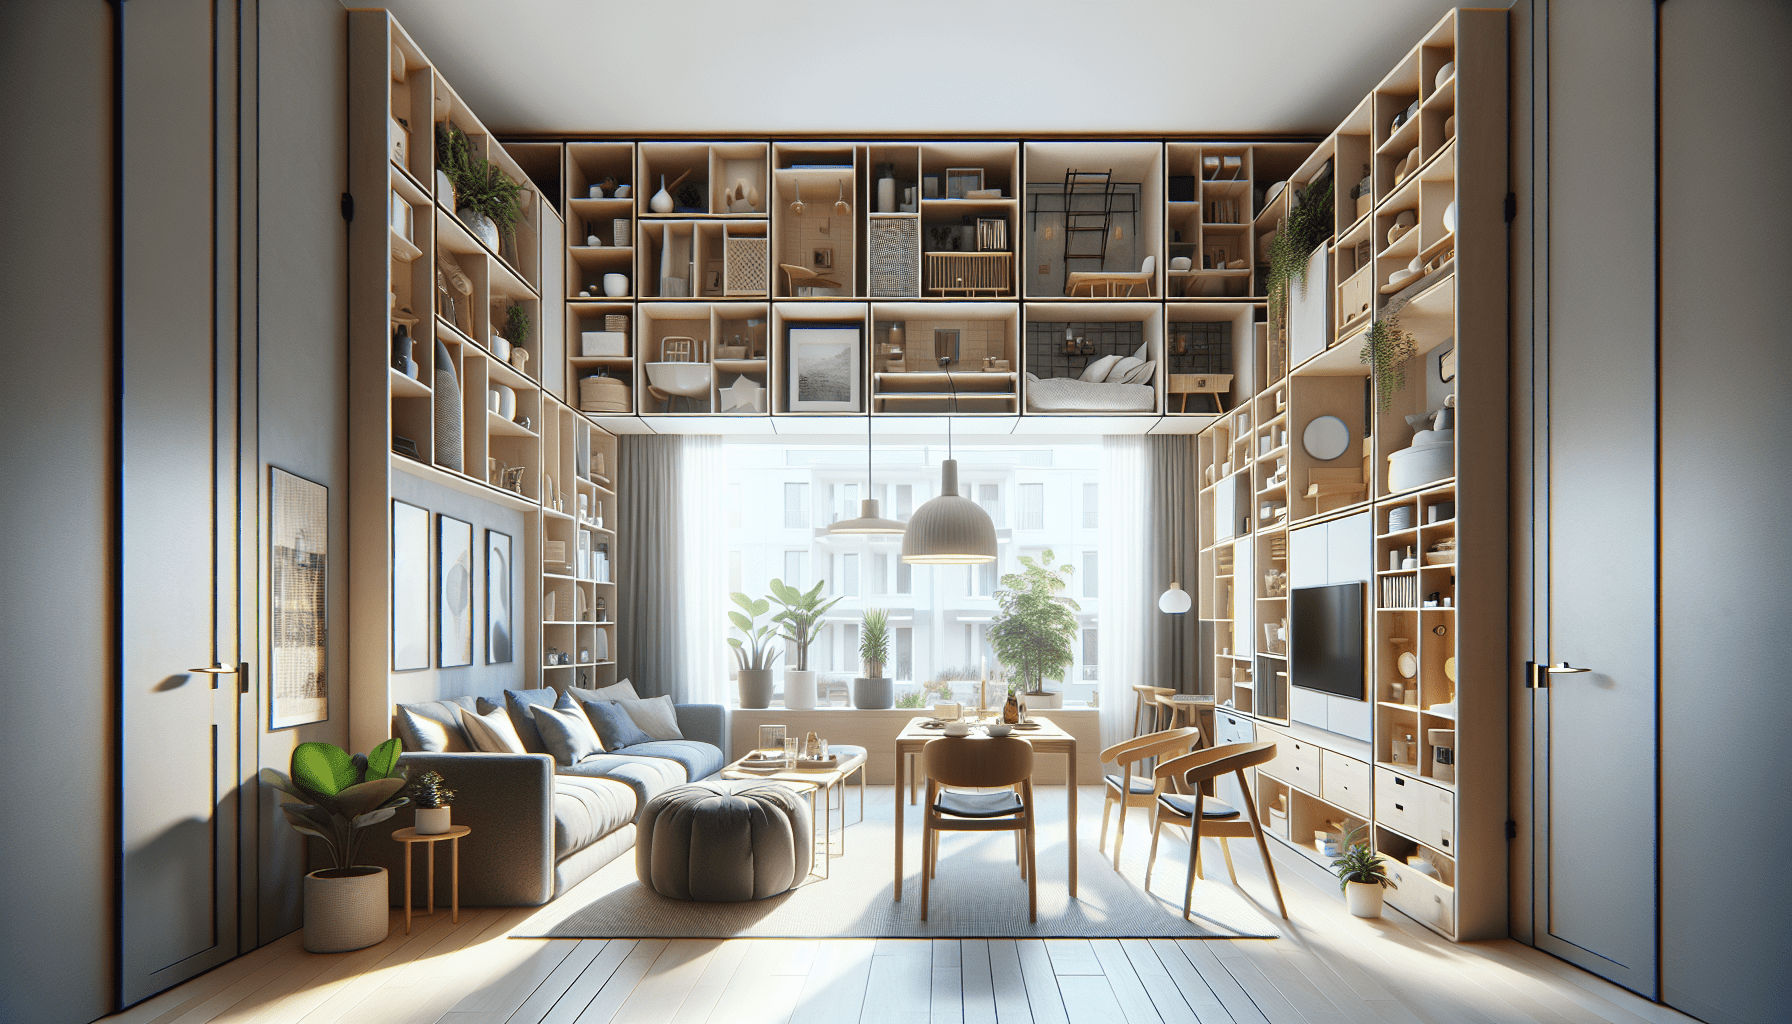 Space Planning For Small Apartments